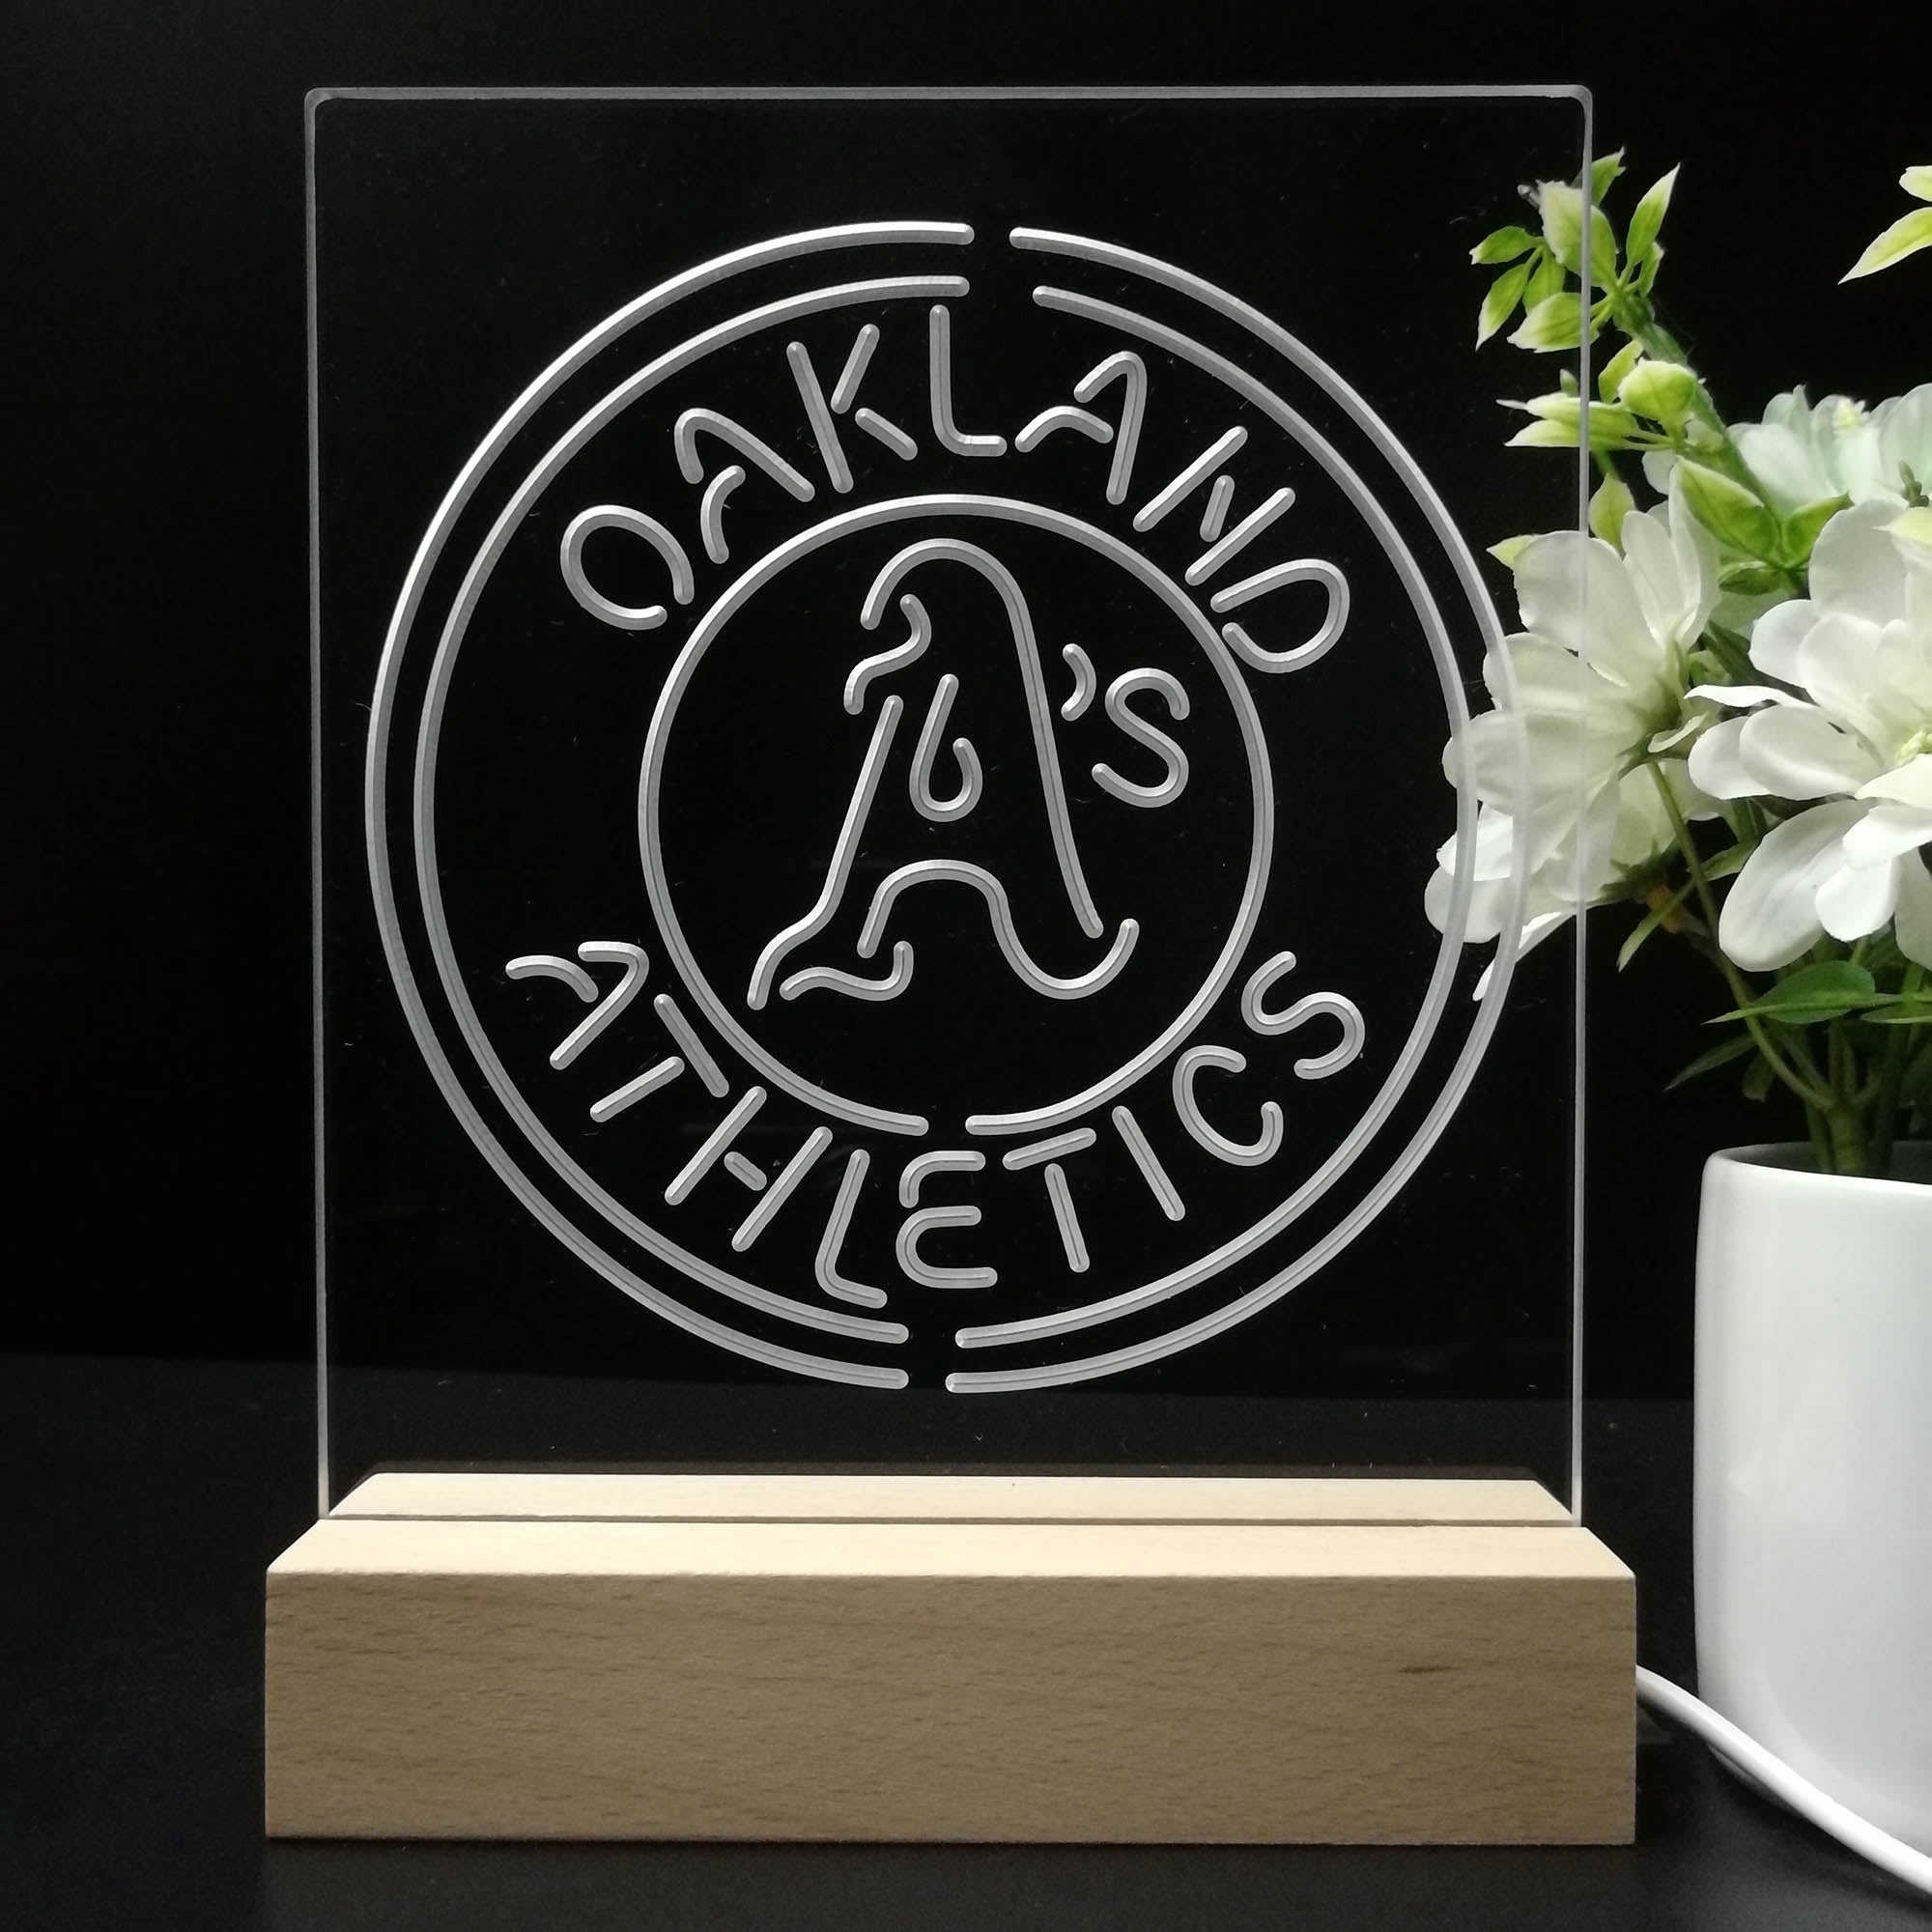 Oakland Athletics Neon Sign Table Top Lamp